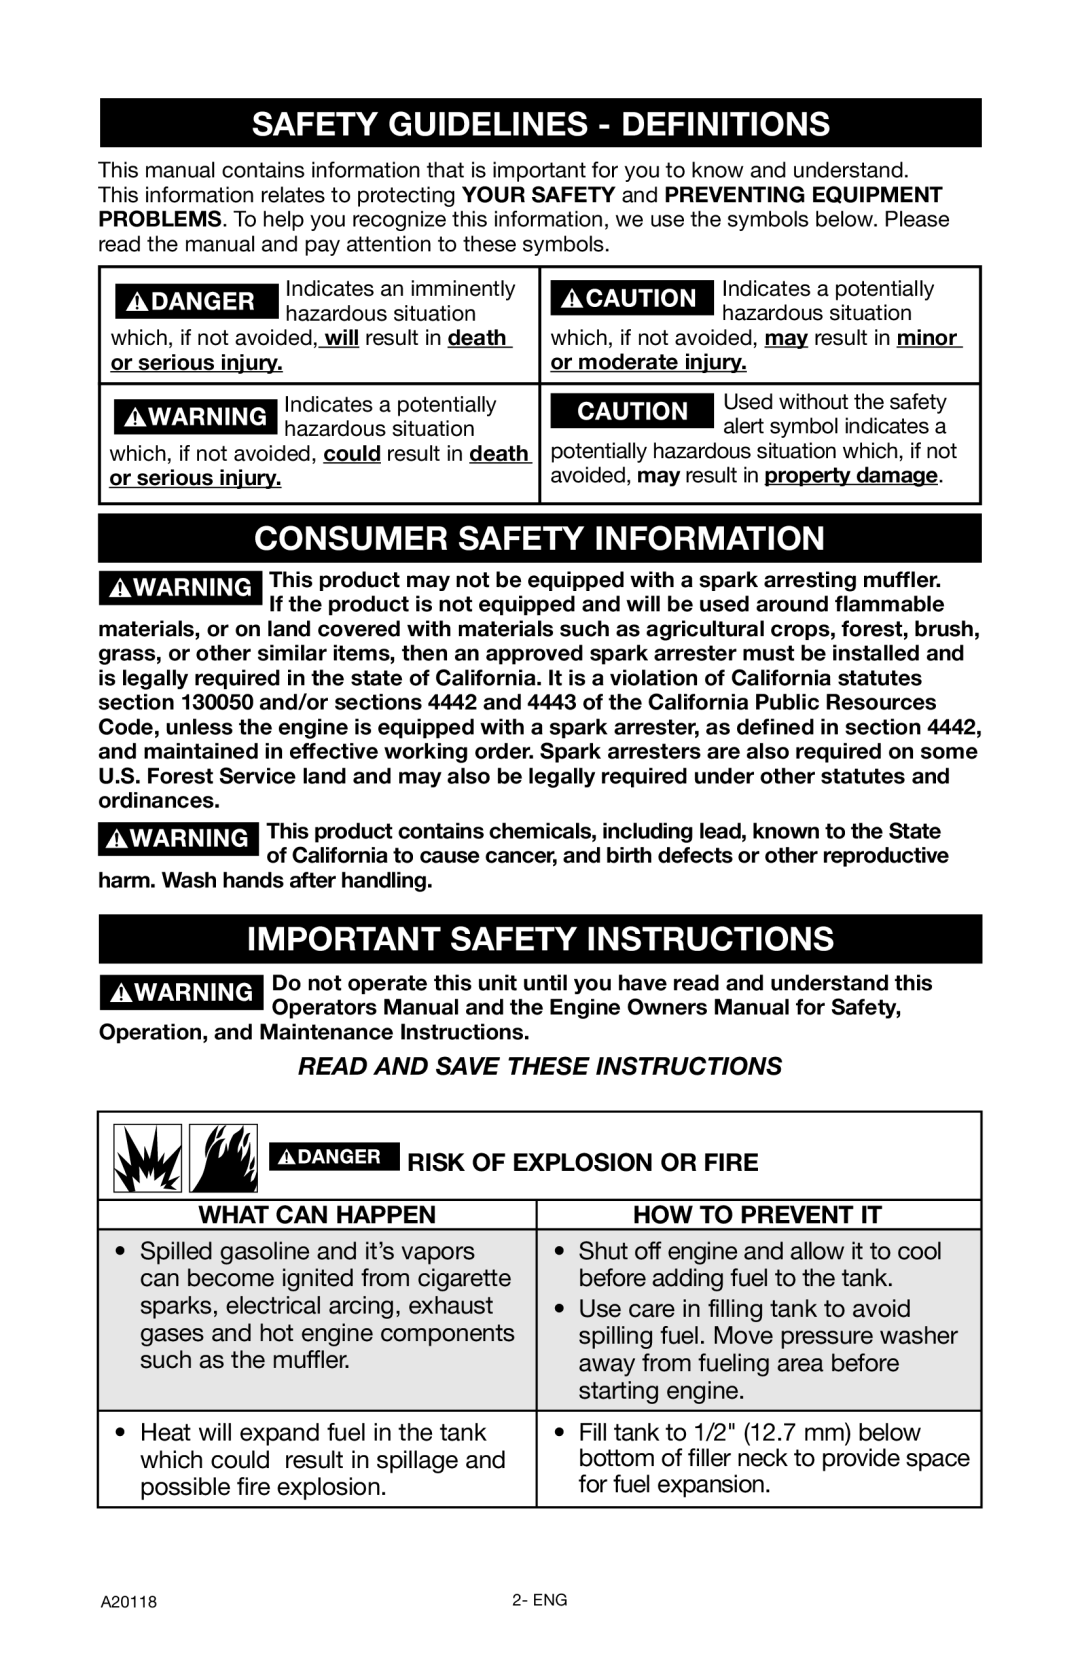 DeVillbiss Air Power Company XC2800, A20118 Safety Guidelines - Definitions, Consumer Safety Information, What Can Happen 